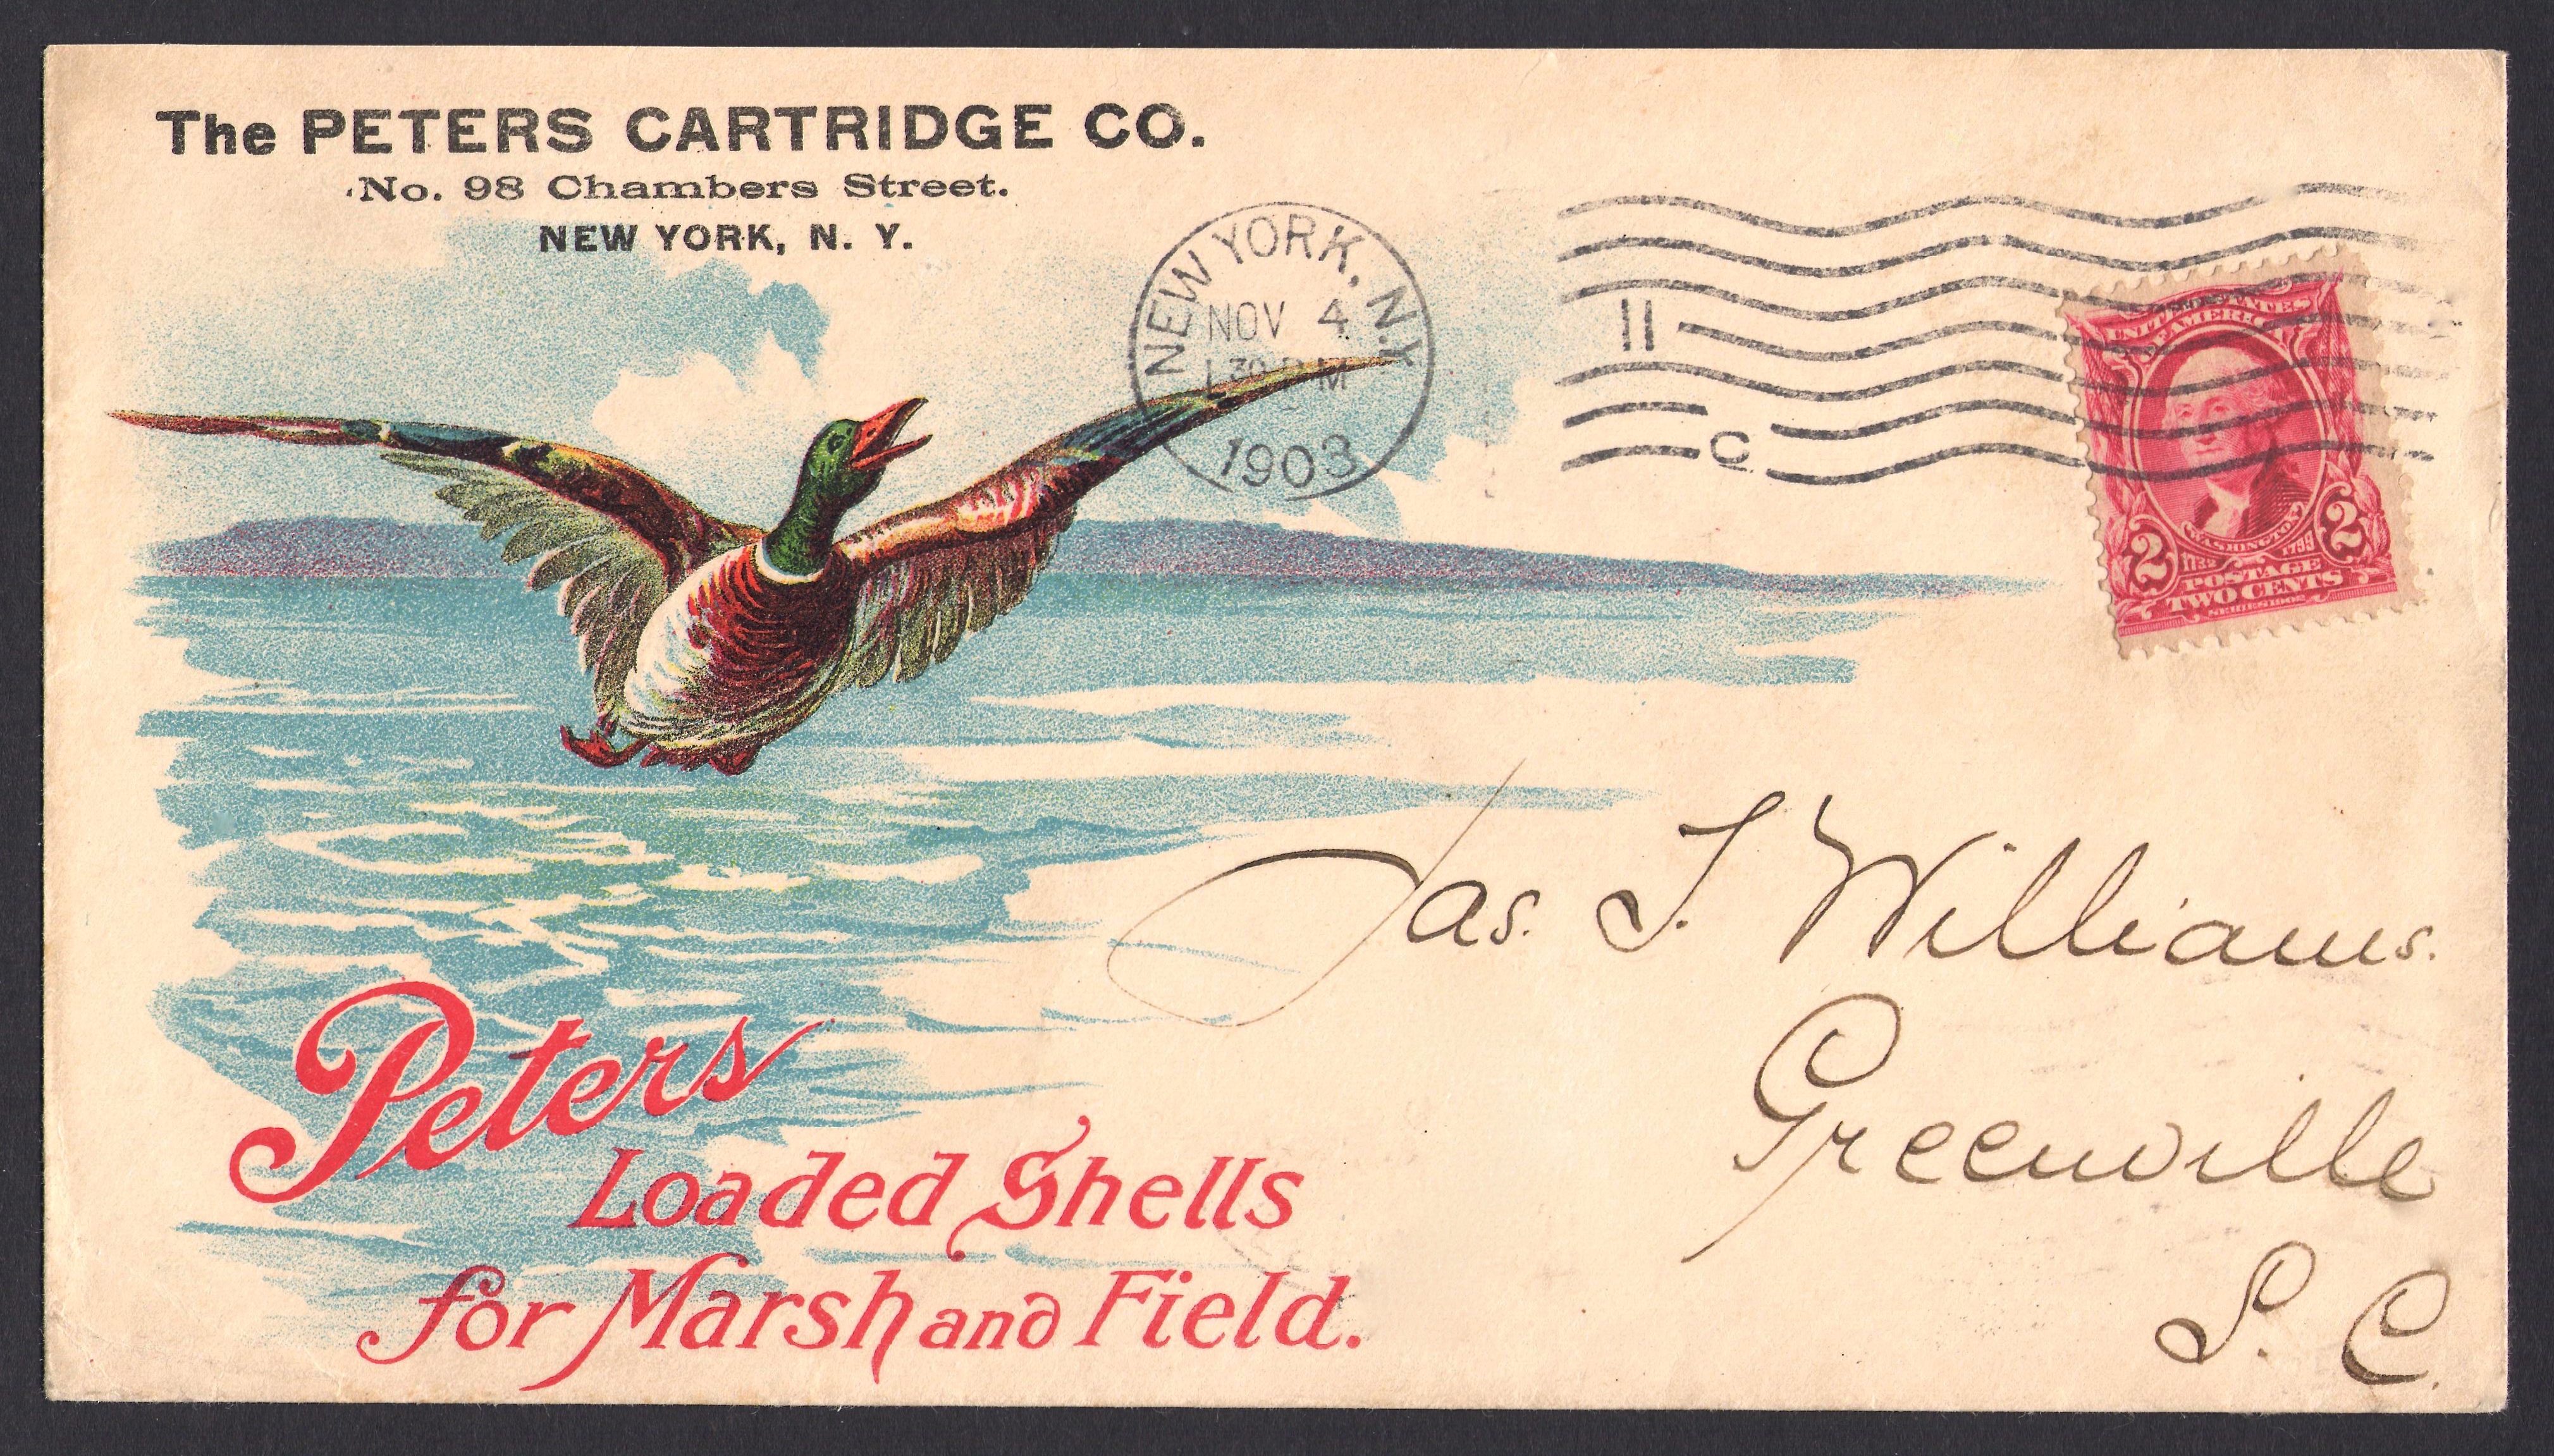 Peters Cartridge Company Advertising Cover